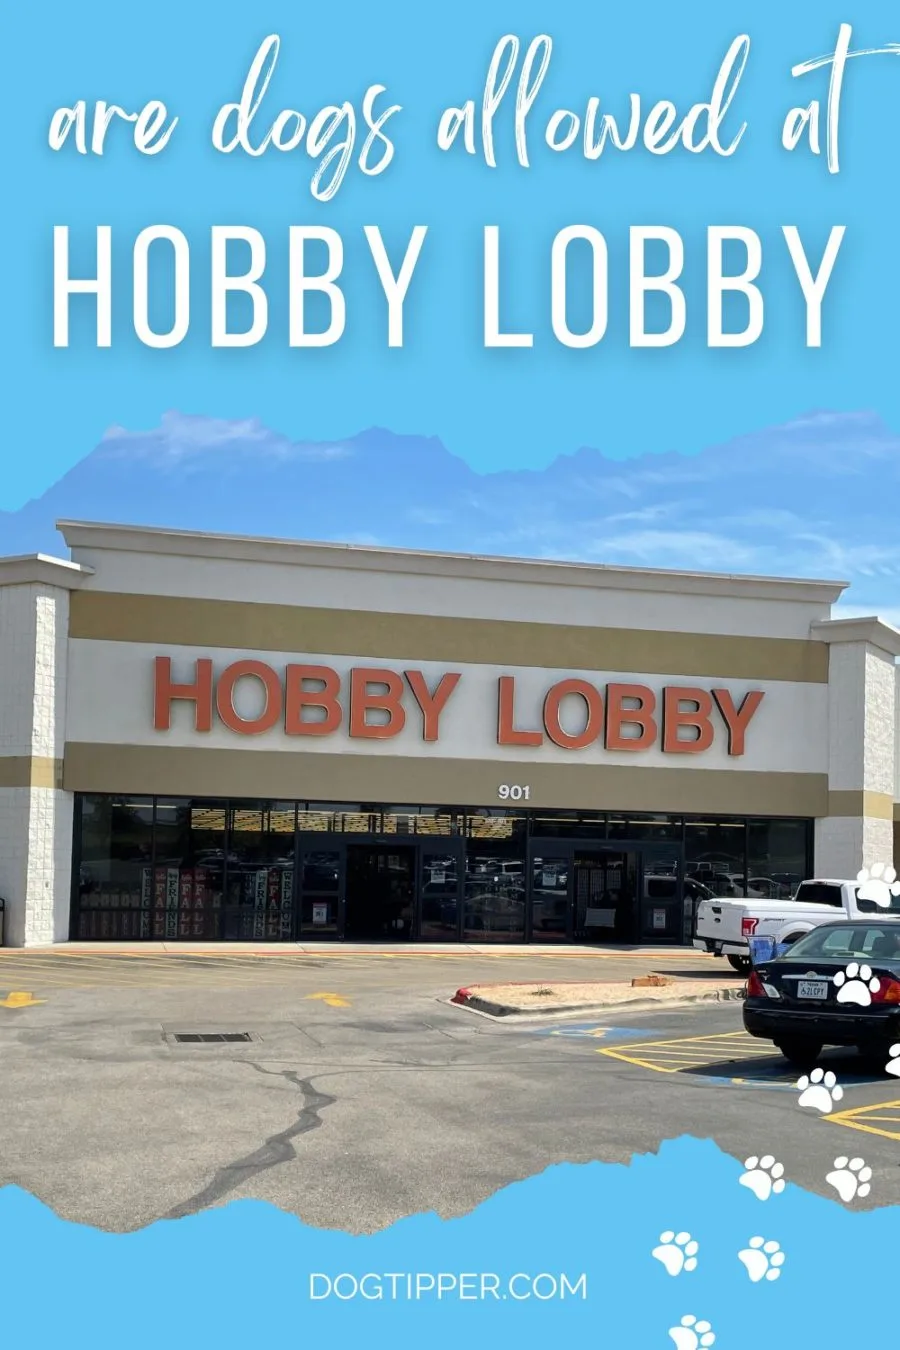 Does Hobby Lobby Allow Dogs?